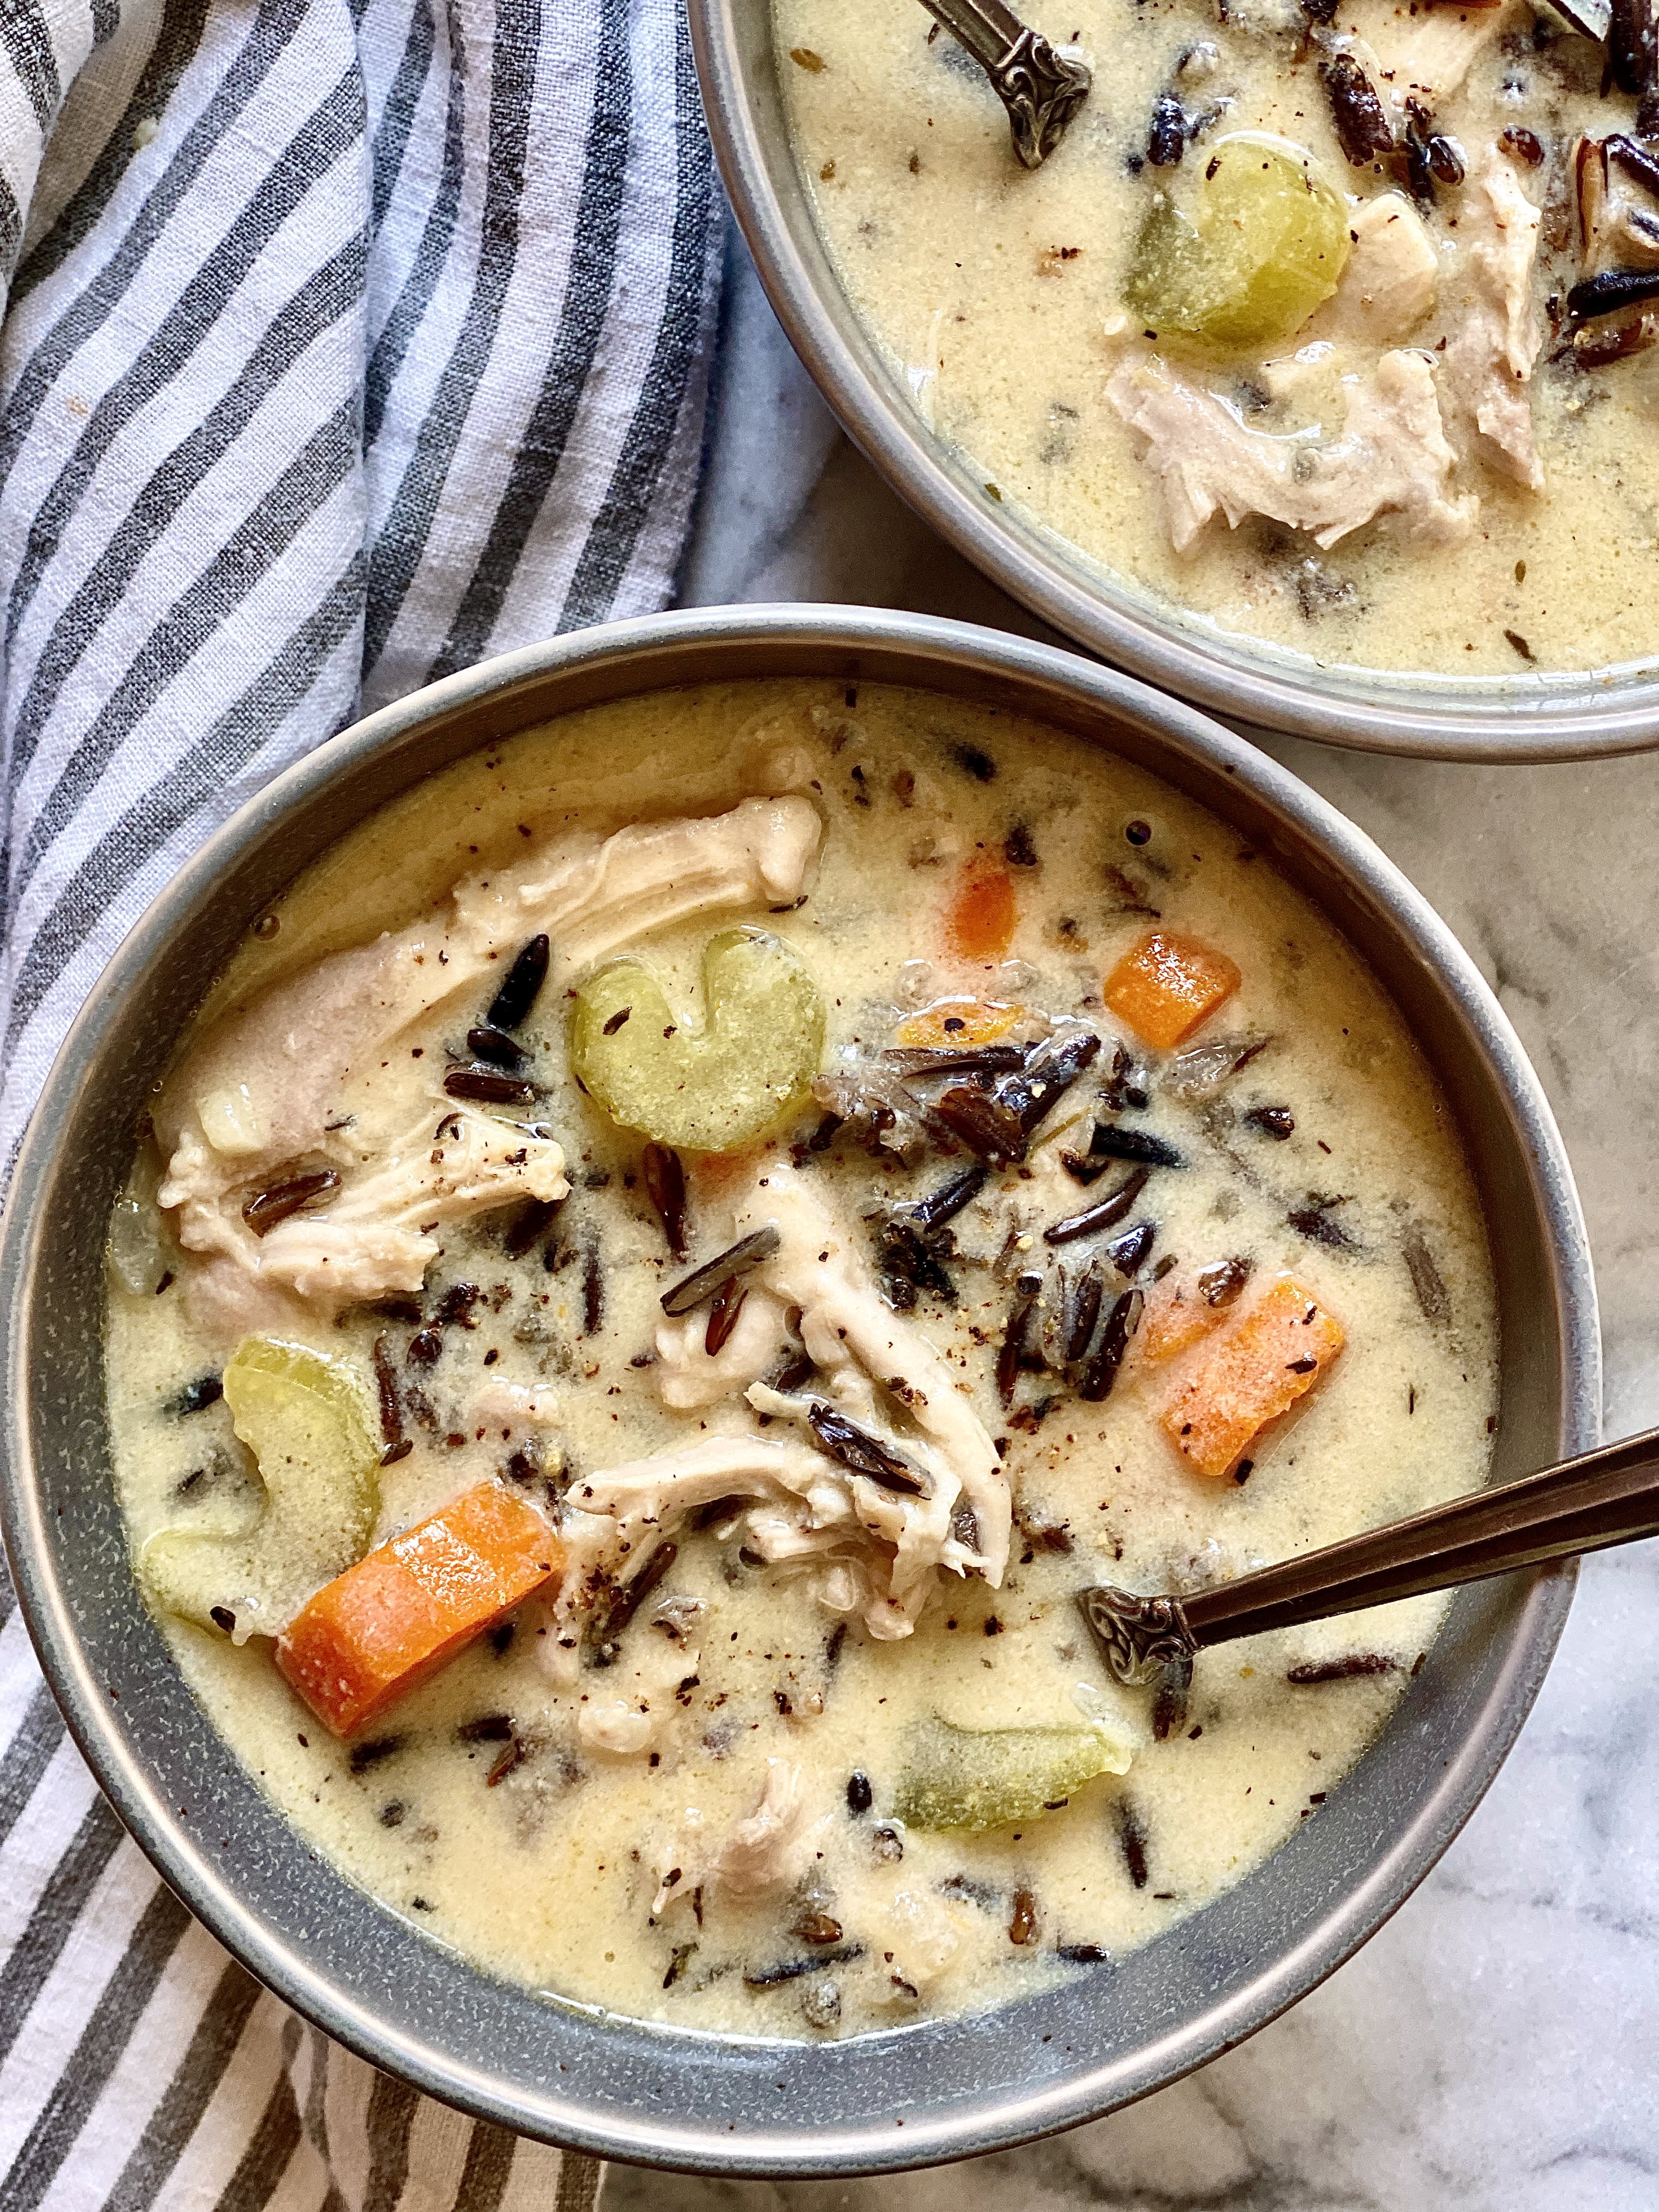 https://cdn.apartmenttherapy.info/image/upload/v1666333867/k/Edit/2022-12-Chicken-And-Wild-Rice-Soup/chicken-wild-rice-soup-4.jpg